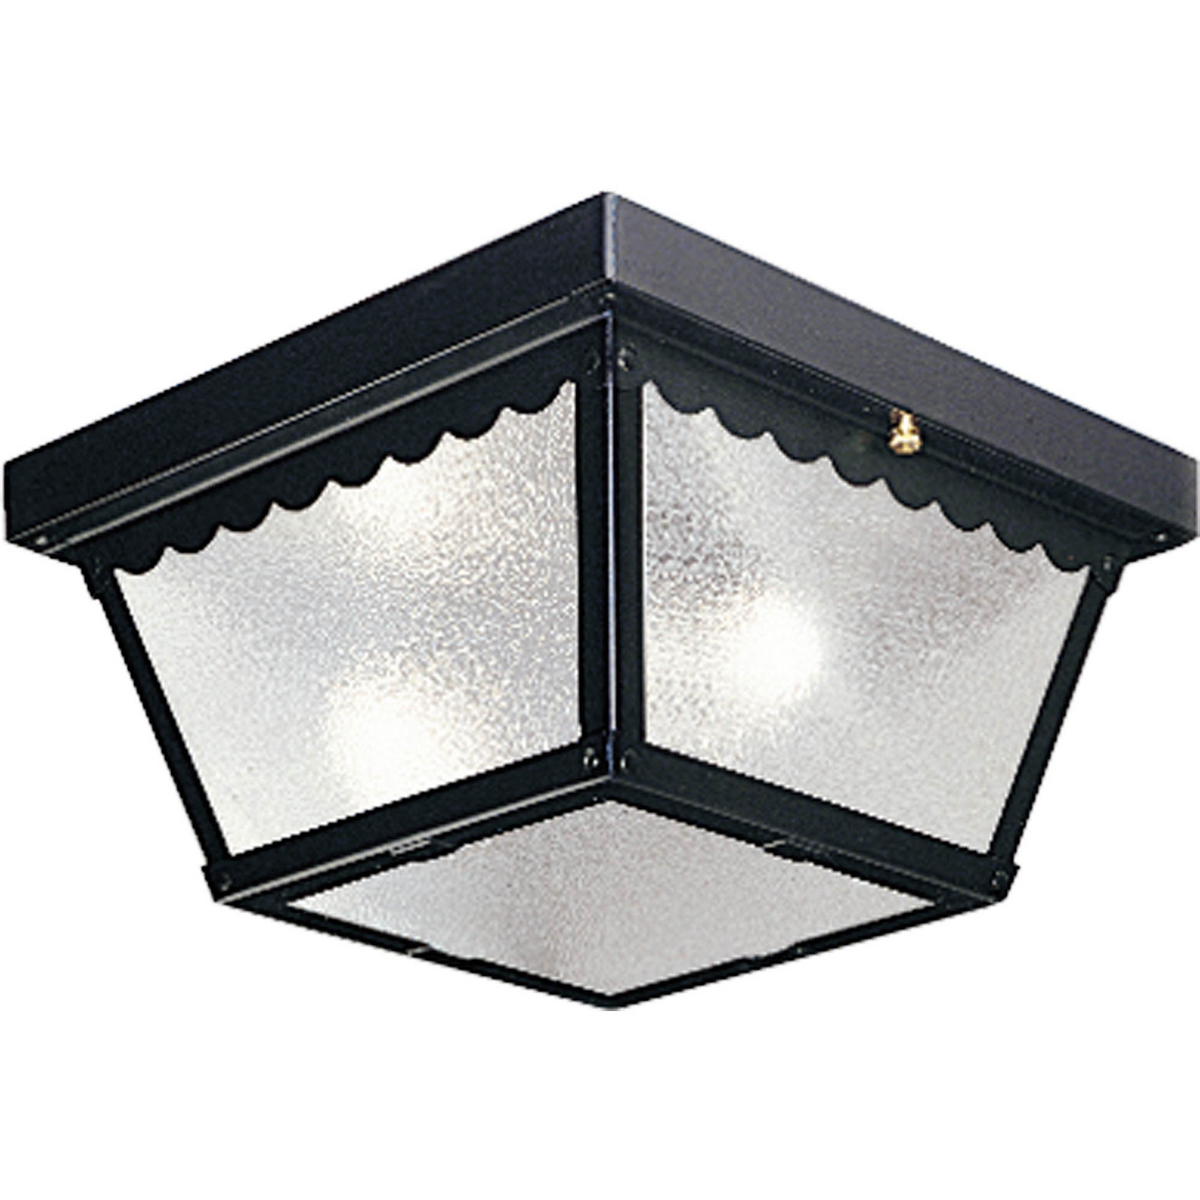 Two-light ceiling mount fixture with textured glass and scalloped edge detailing. Powder coat finish. Black finish.